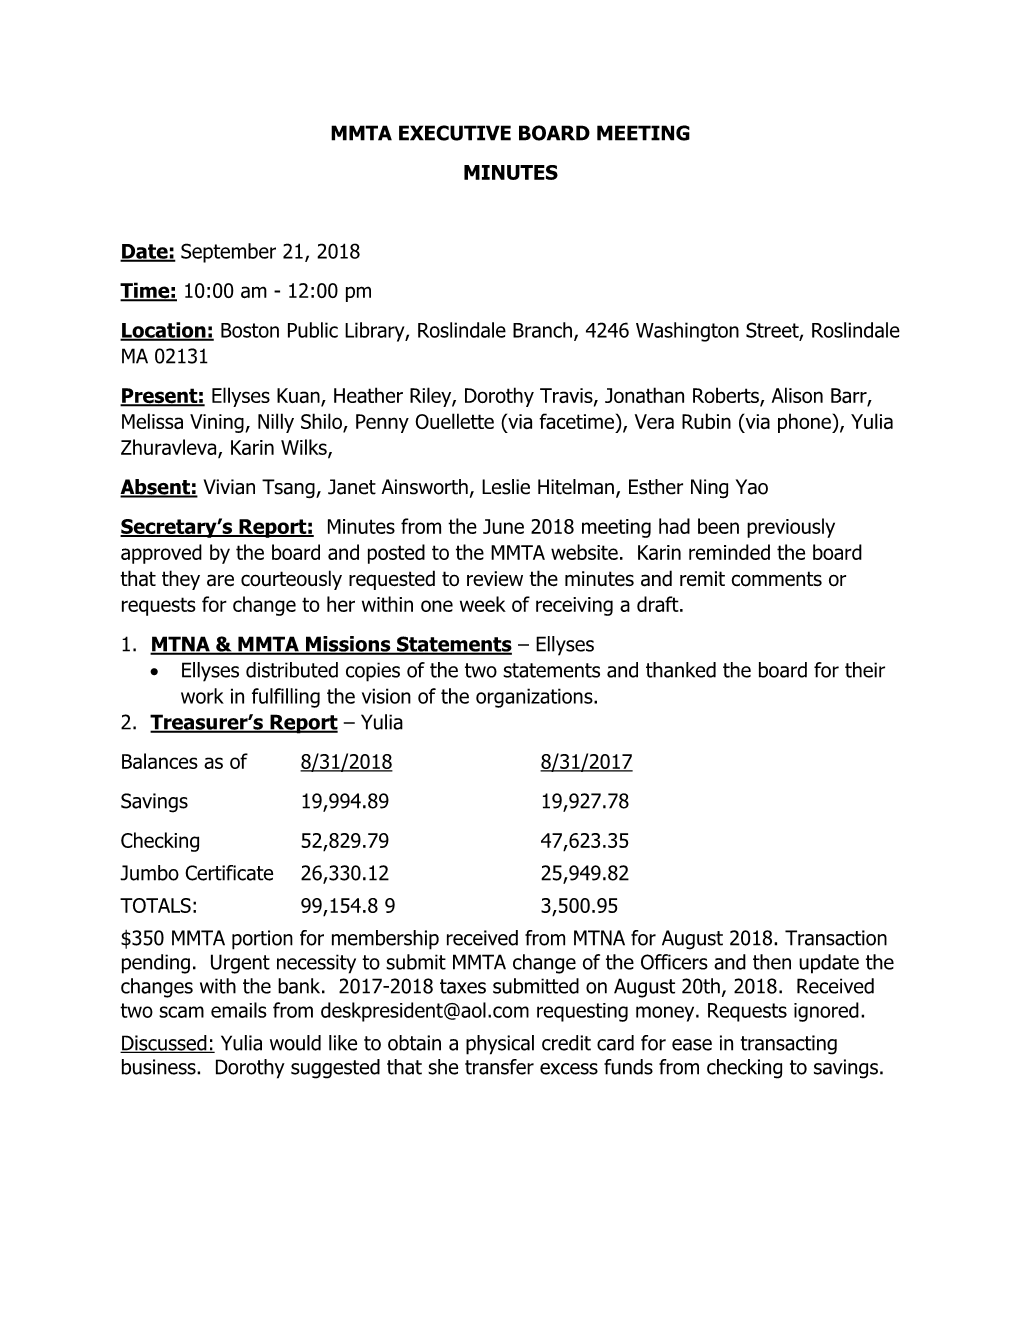 MMTA EXECUTIVE BOARD MEETING MINUTES Date: September